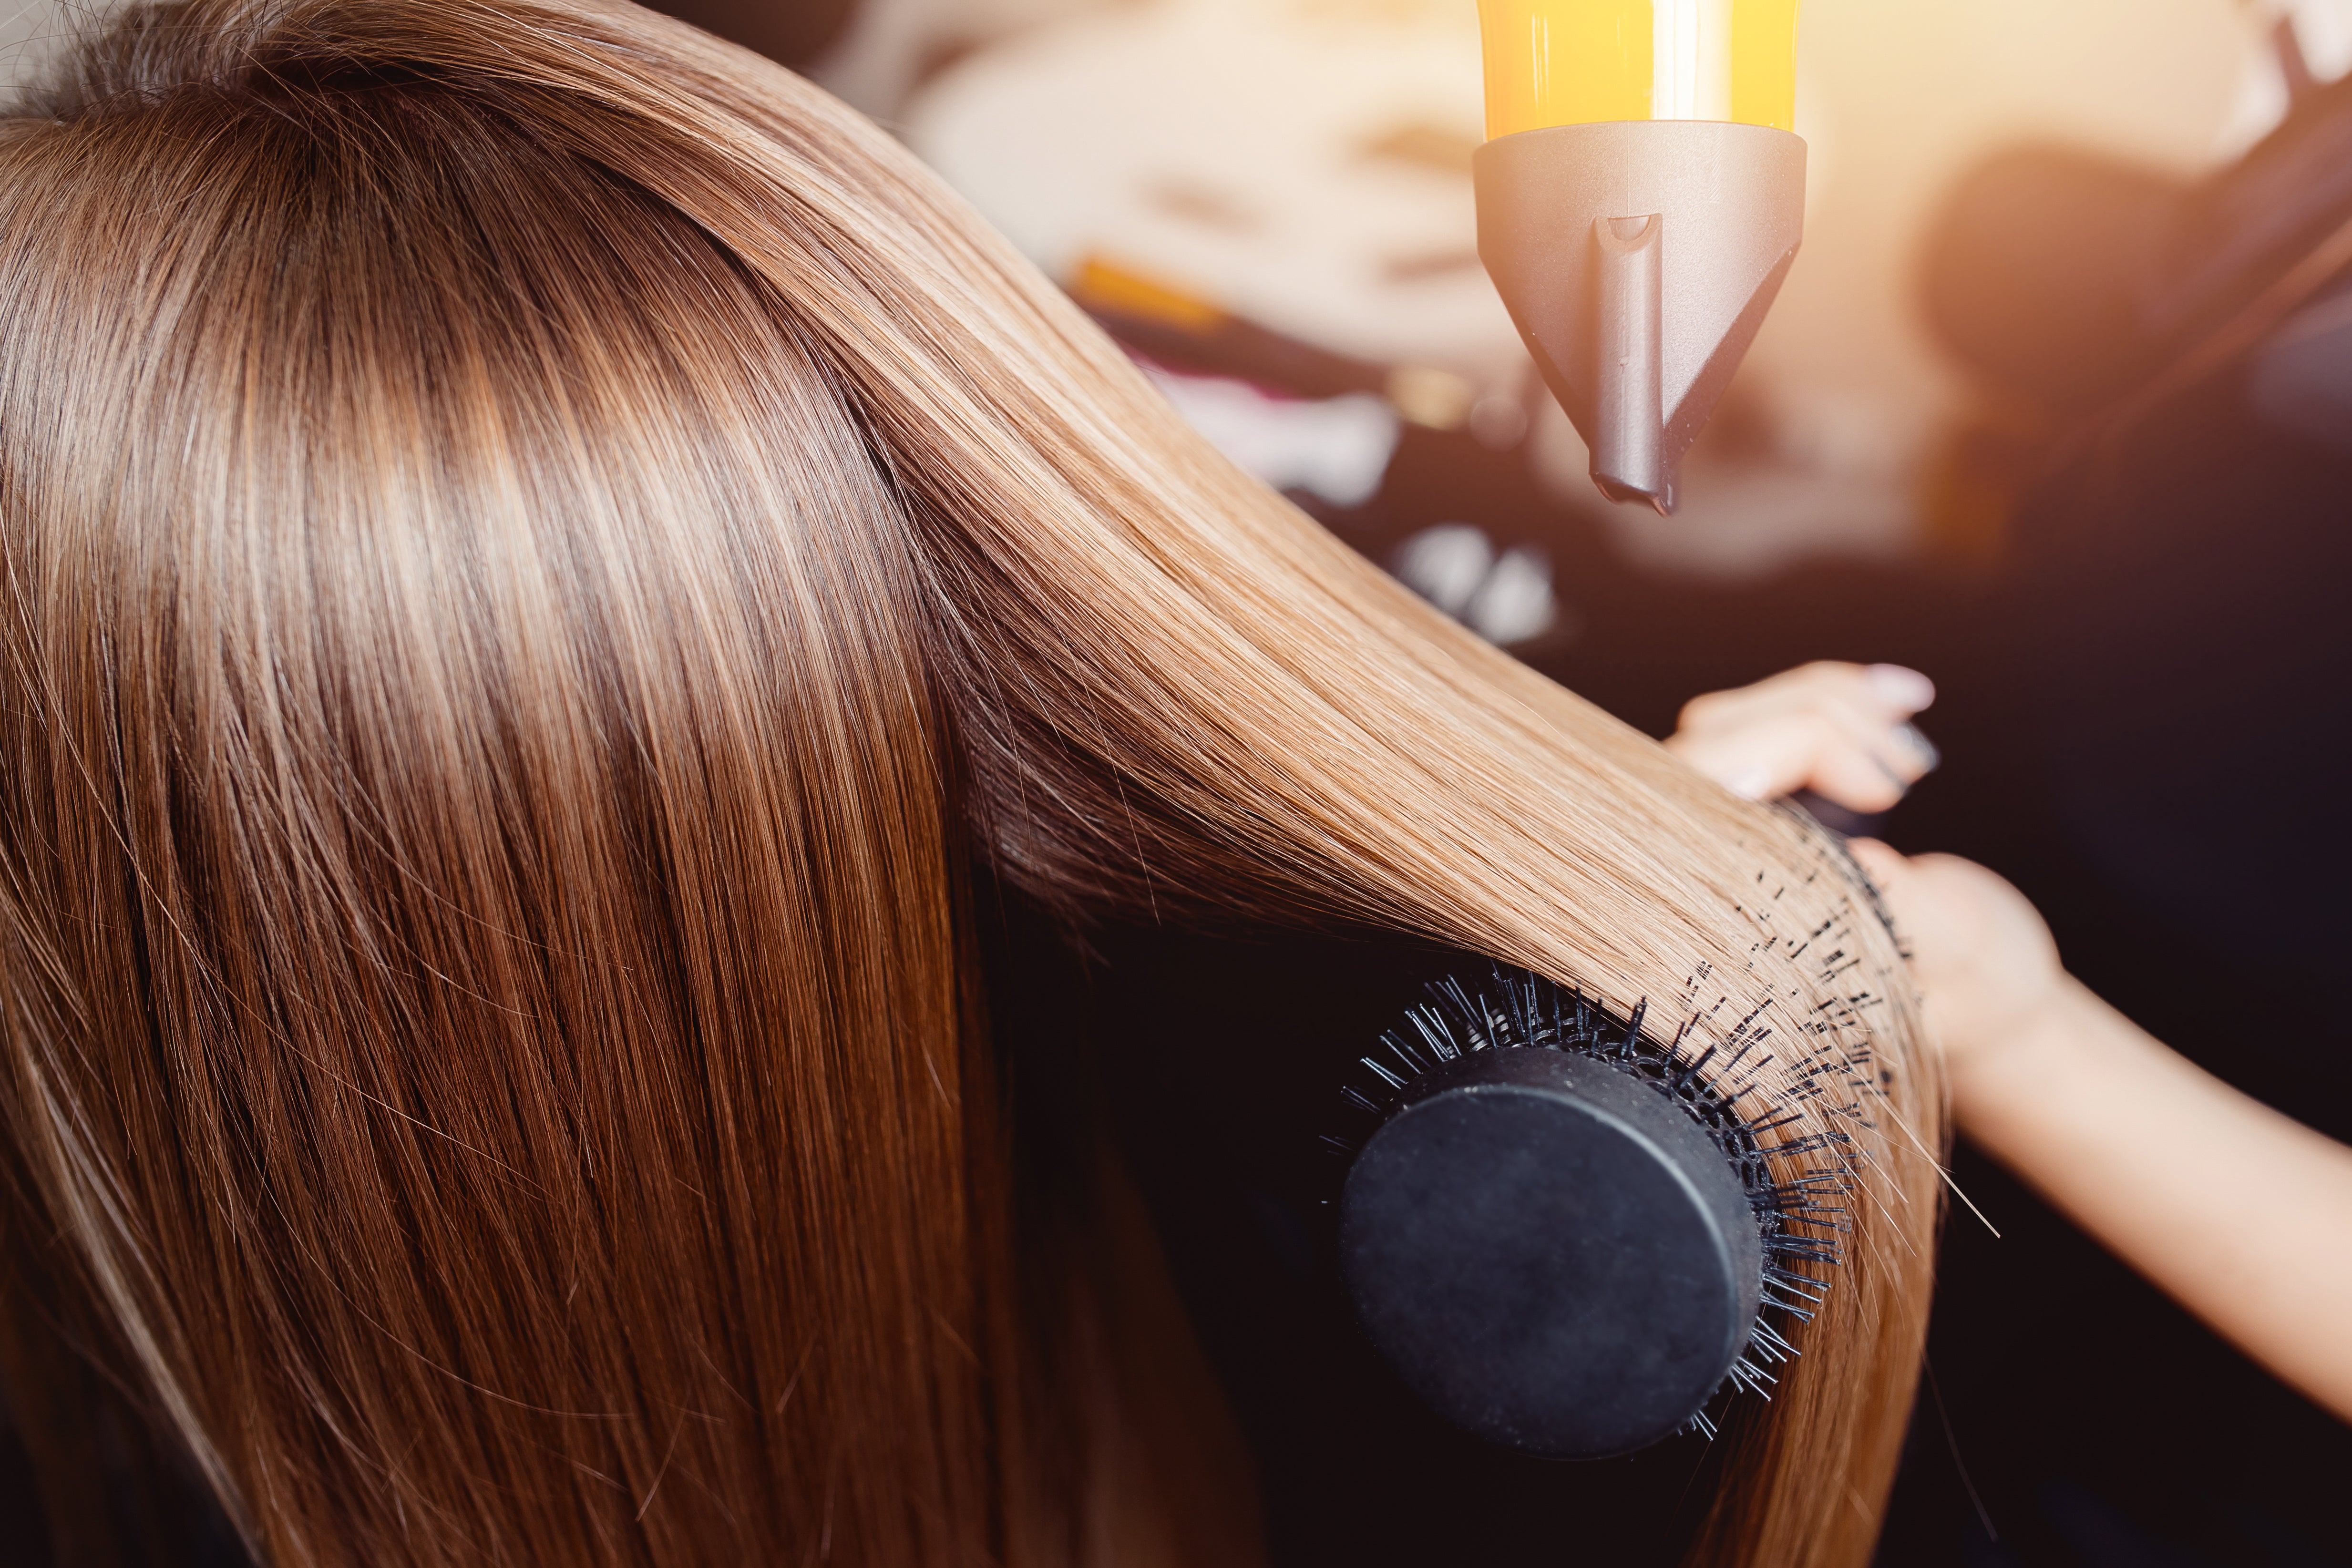 The Artistry of Professional Hair Color: What Are the Benefits?